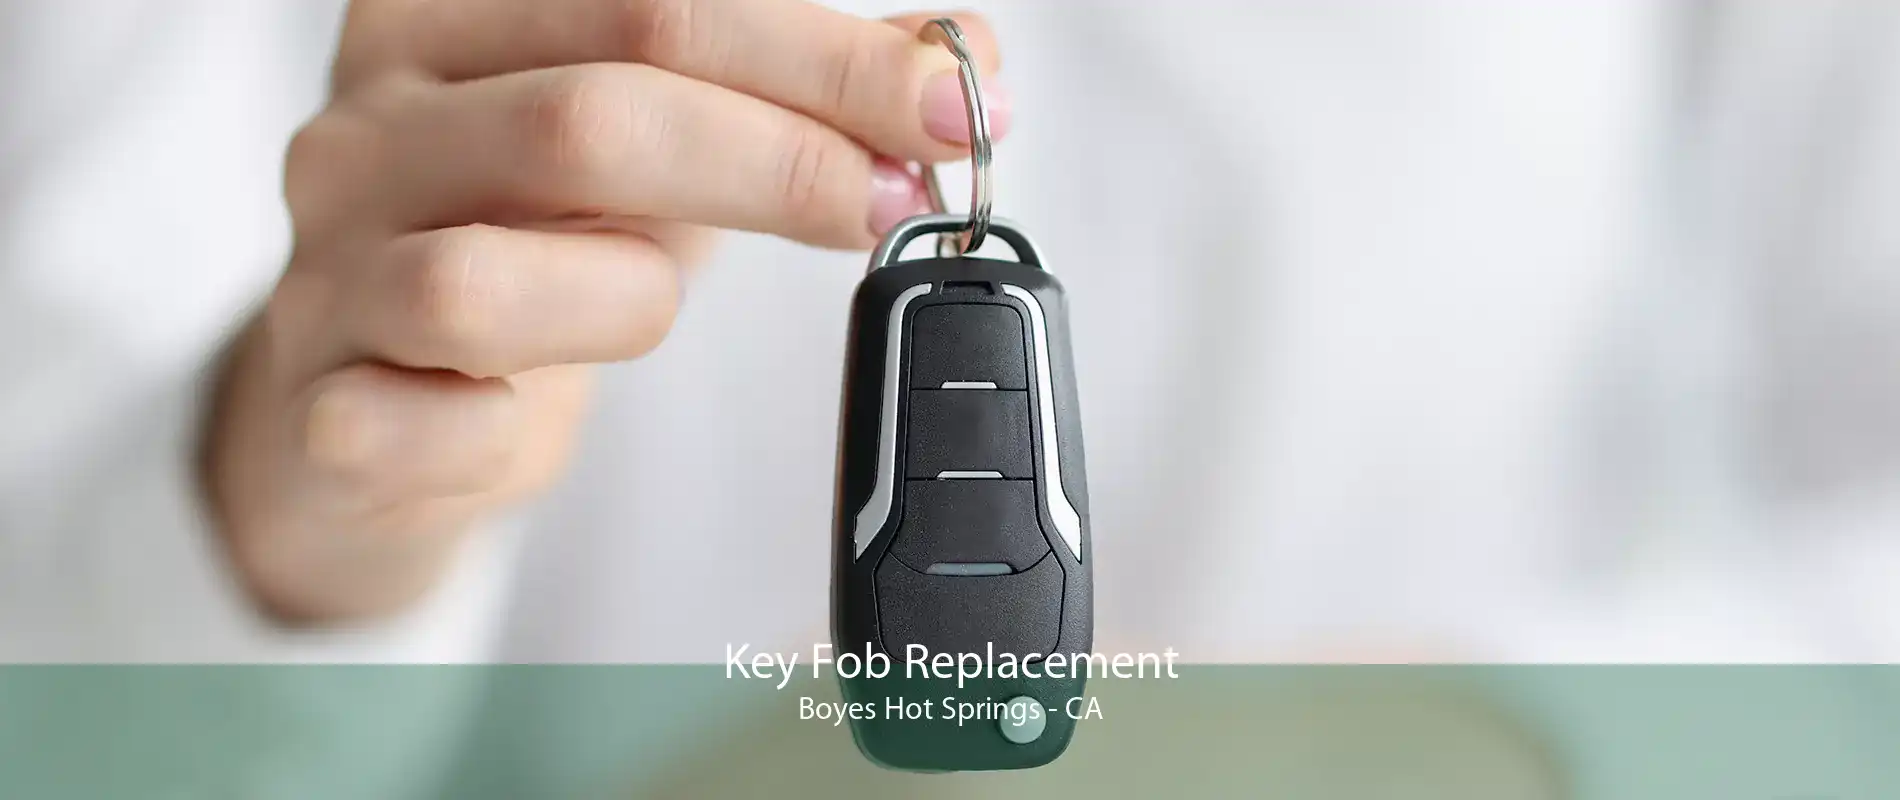 Key Fob Replacement Boyes Hot Springs - CA